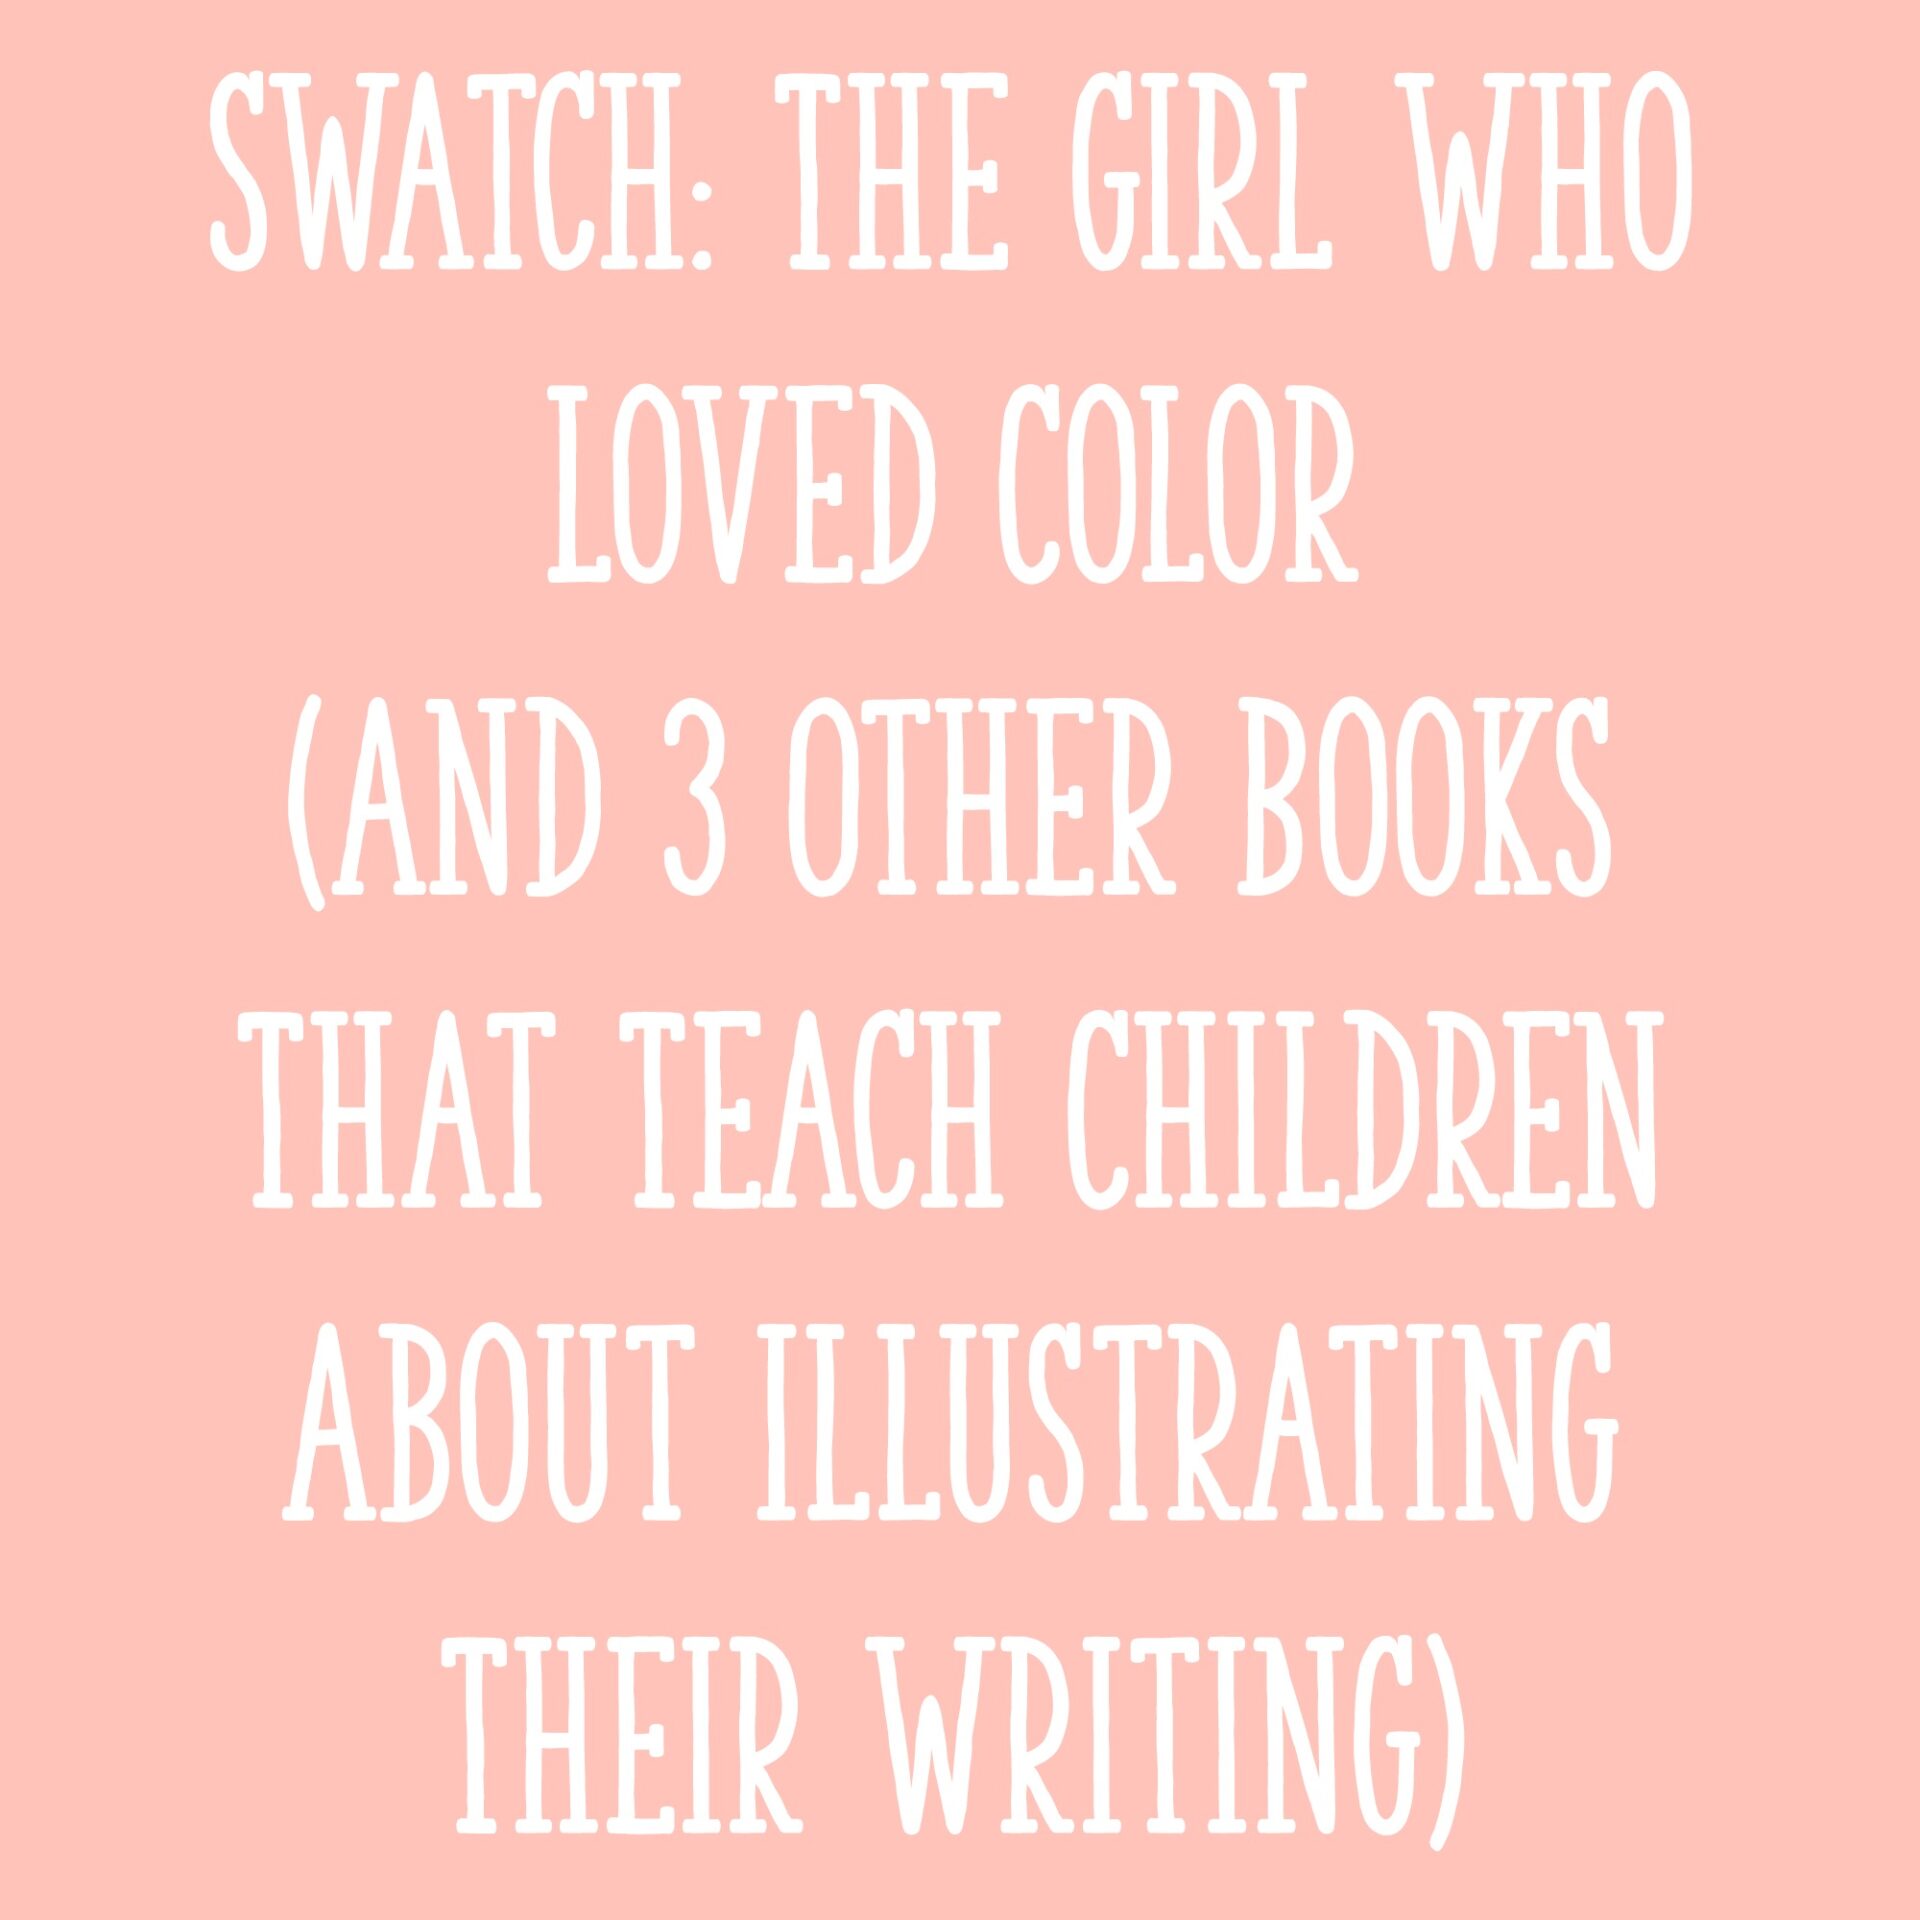 Swatch: The Girl Who Loved Color (And 3 Other Books That Teach Children About Illustrating Their Writing) - Learning at the Primary Pond